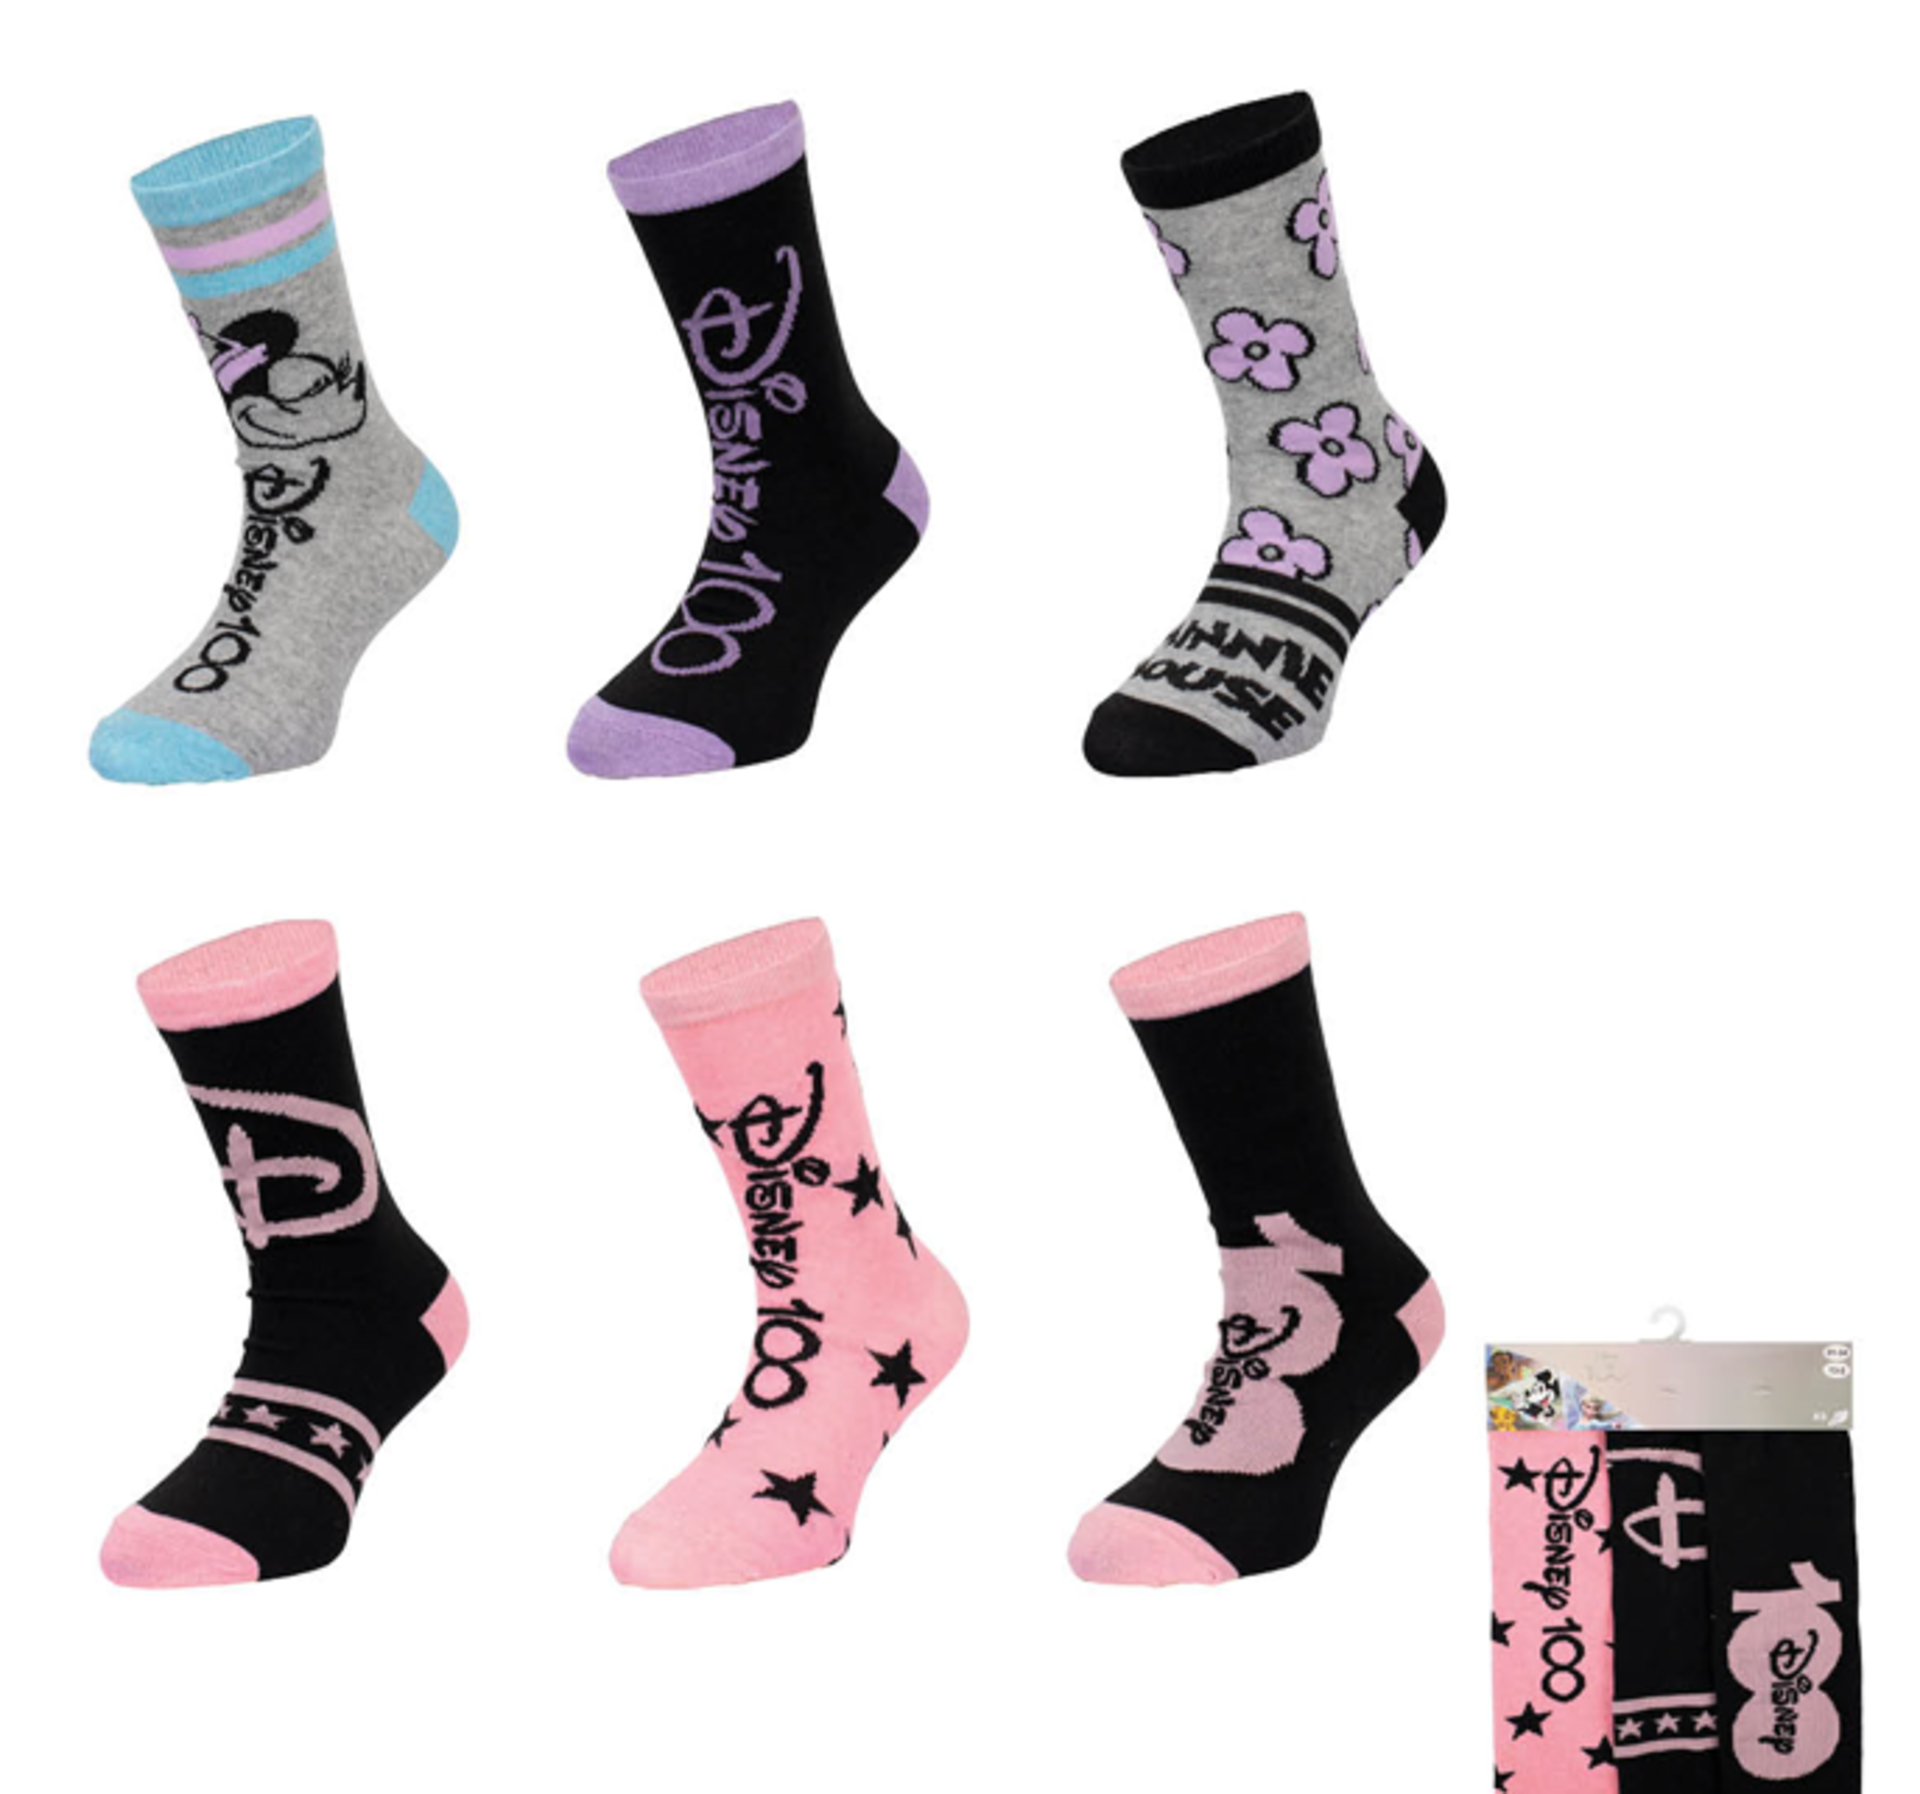 40 x New & Packaged Official Licenced Disney Minnie Mouse Pack of 3 Mixed Socks. Various sized and - Image 2 of 2